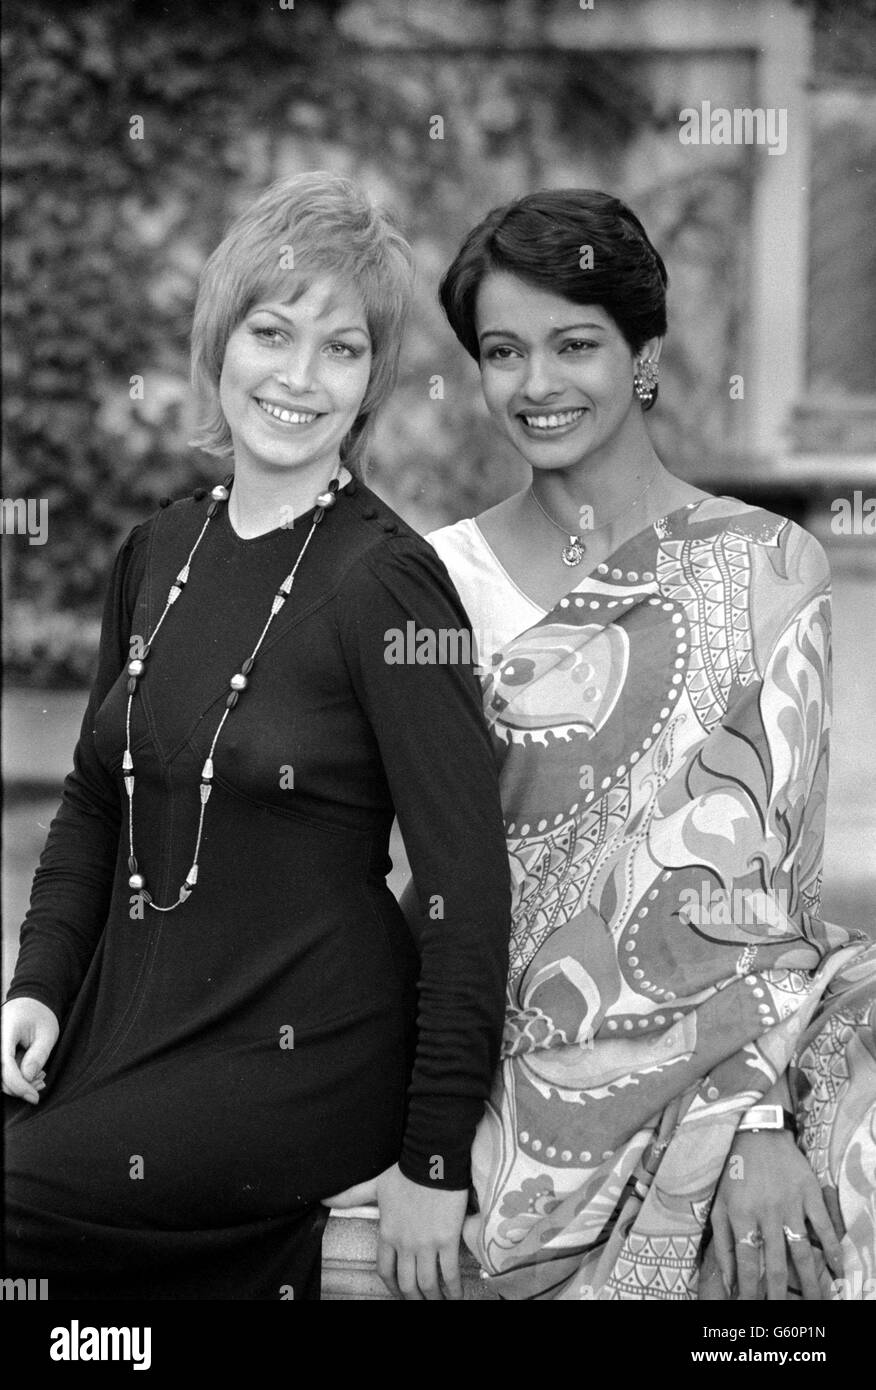 Just chosen for their first film roles are English actress Prunella Gee (left) and Indian model Persis Khambatta. They have been cast in an anti-apartheid film, 'The Wilby Conspiracy' as leading ladies to Sidnet Poitier and Michael Caine. Stock Photo